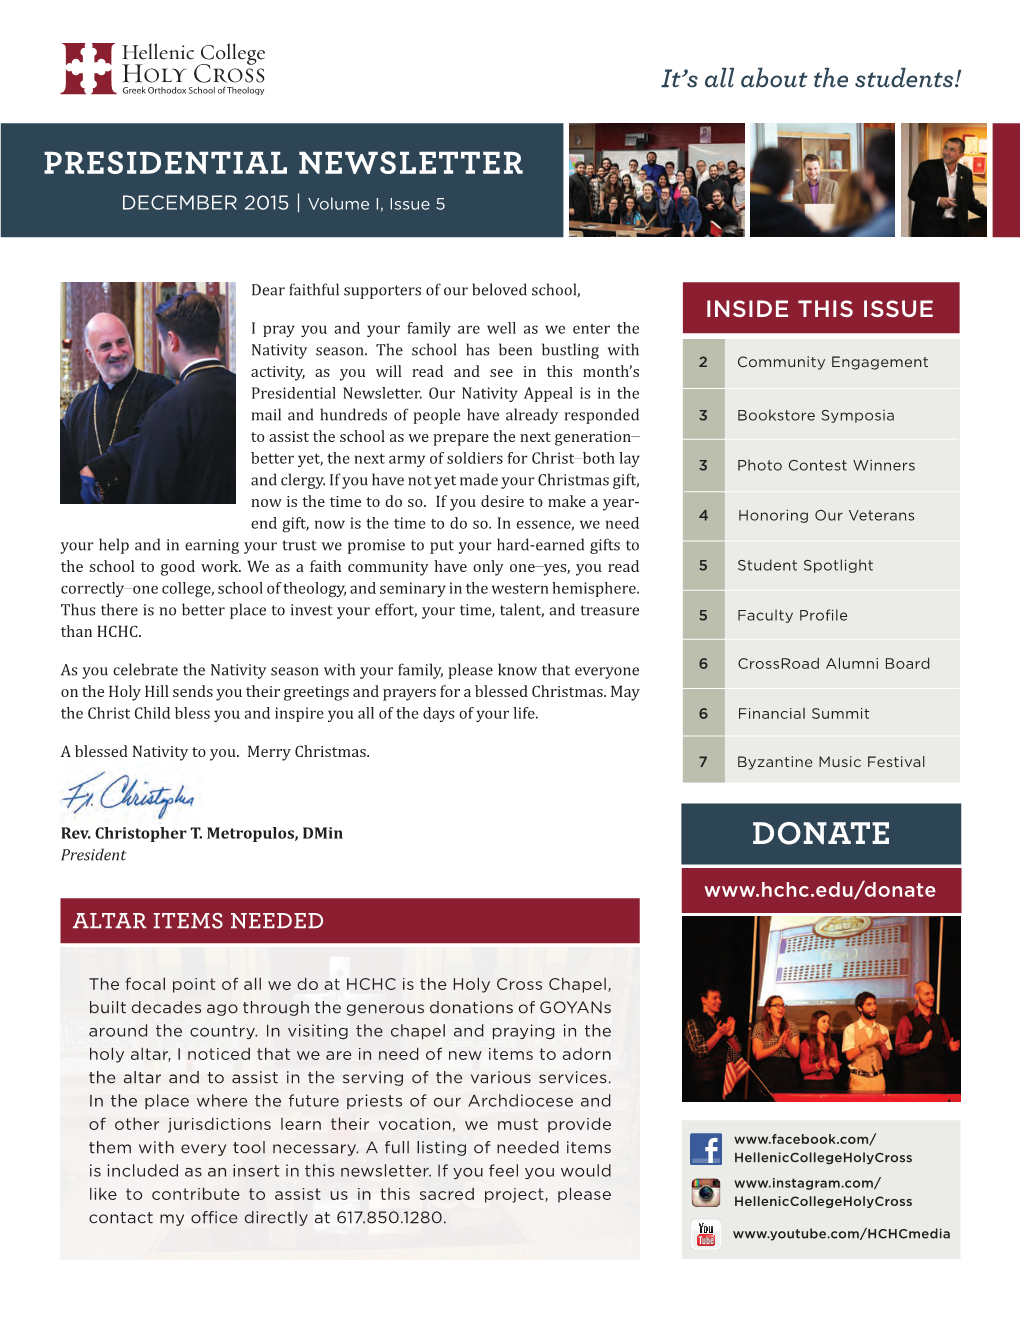 PRESIDENTIAL NEWSLETTER It's All About the Students!